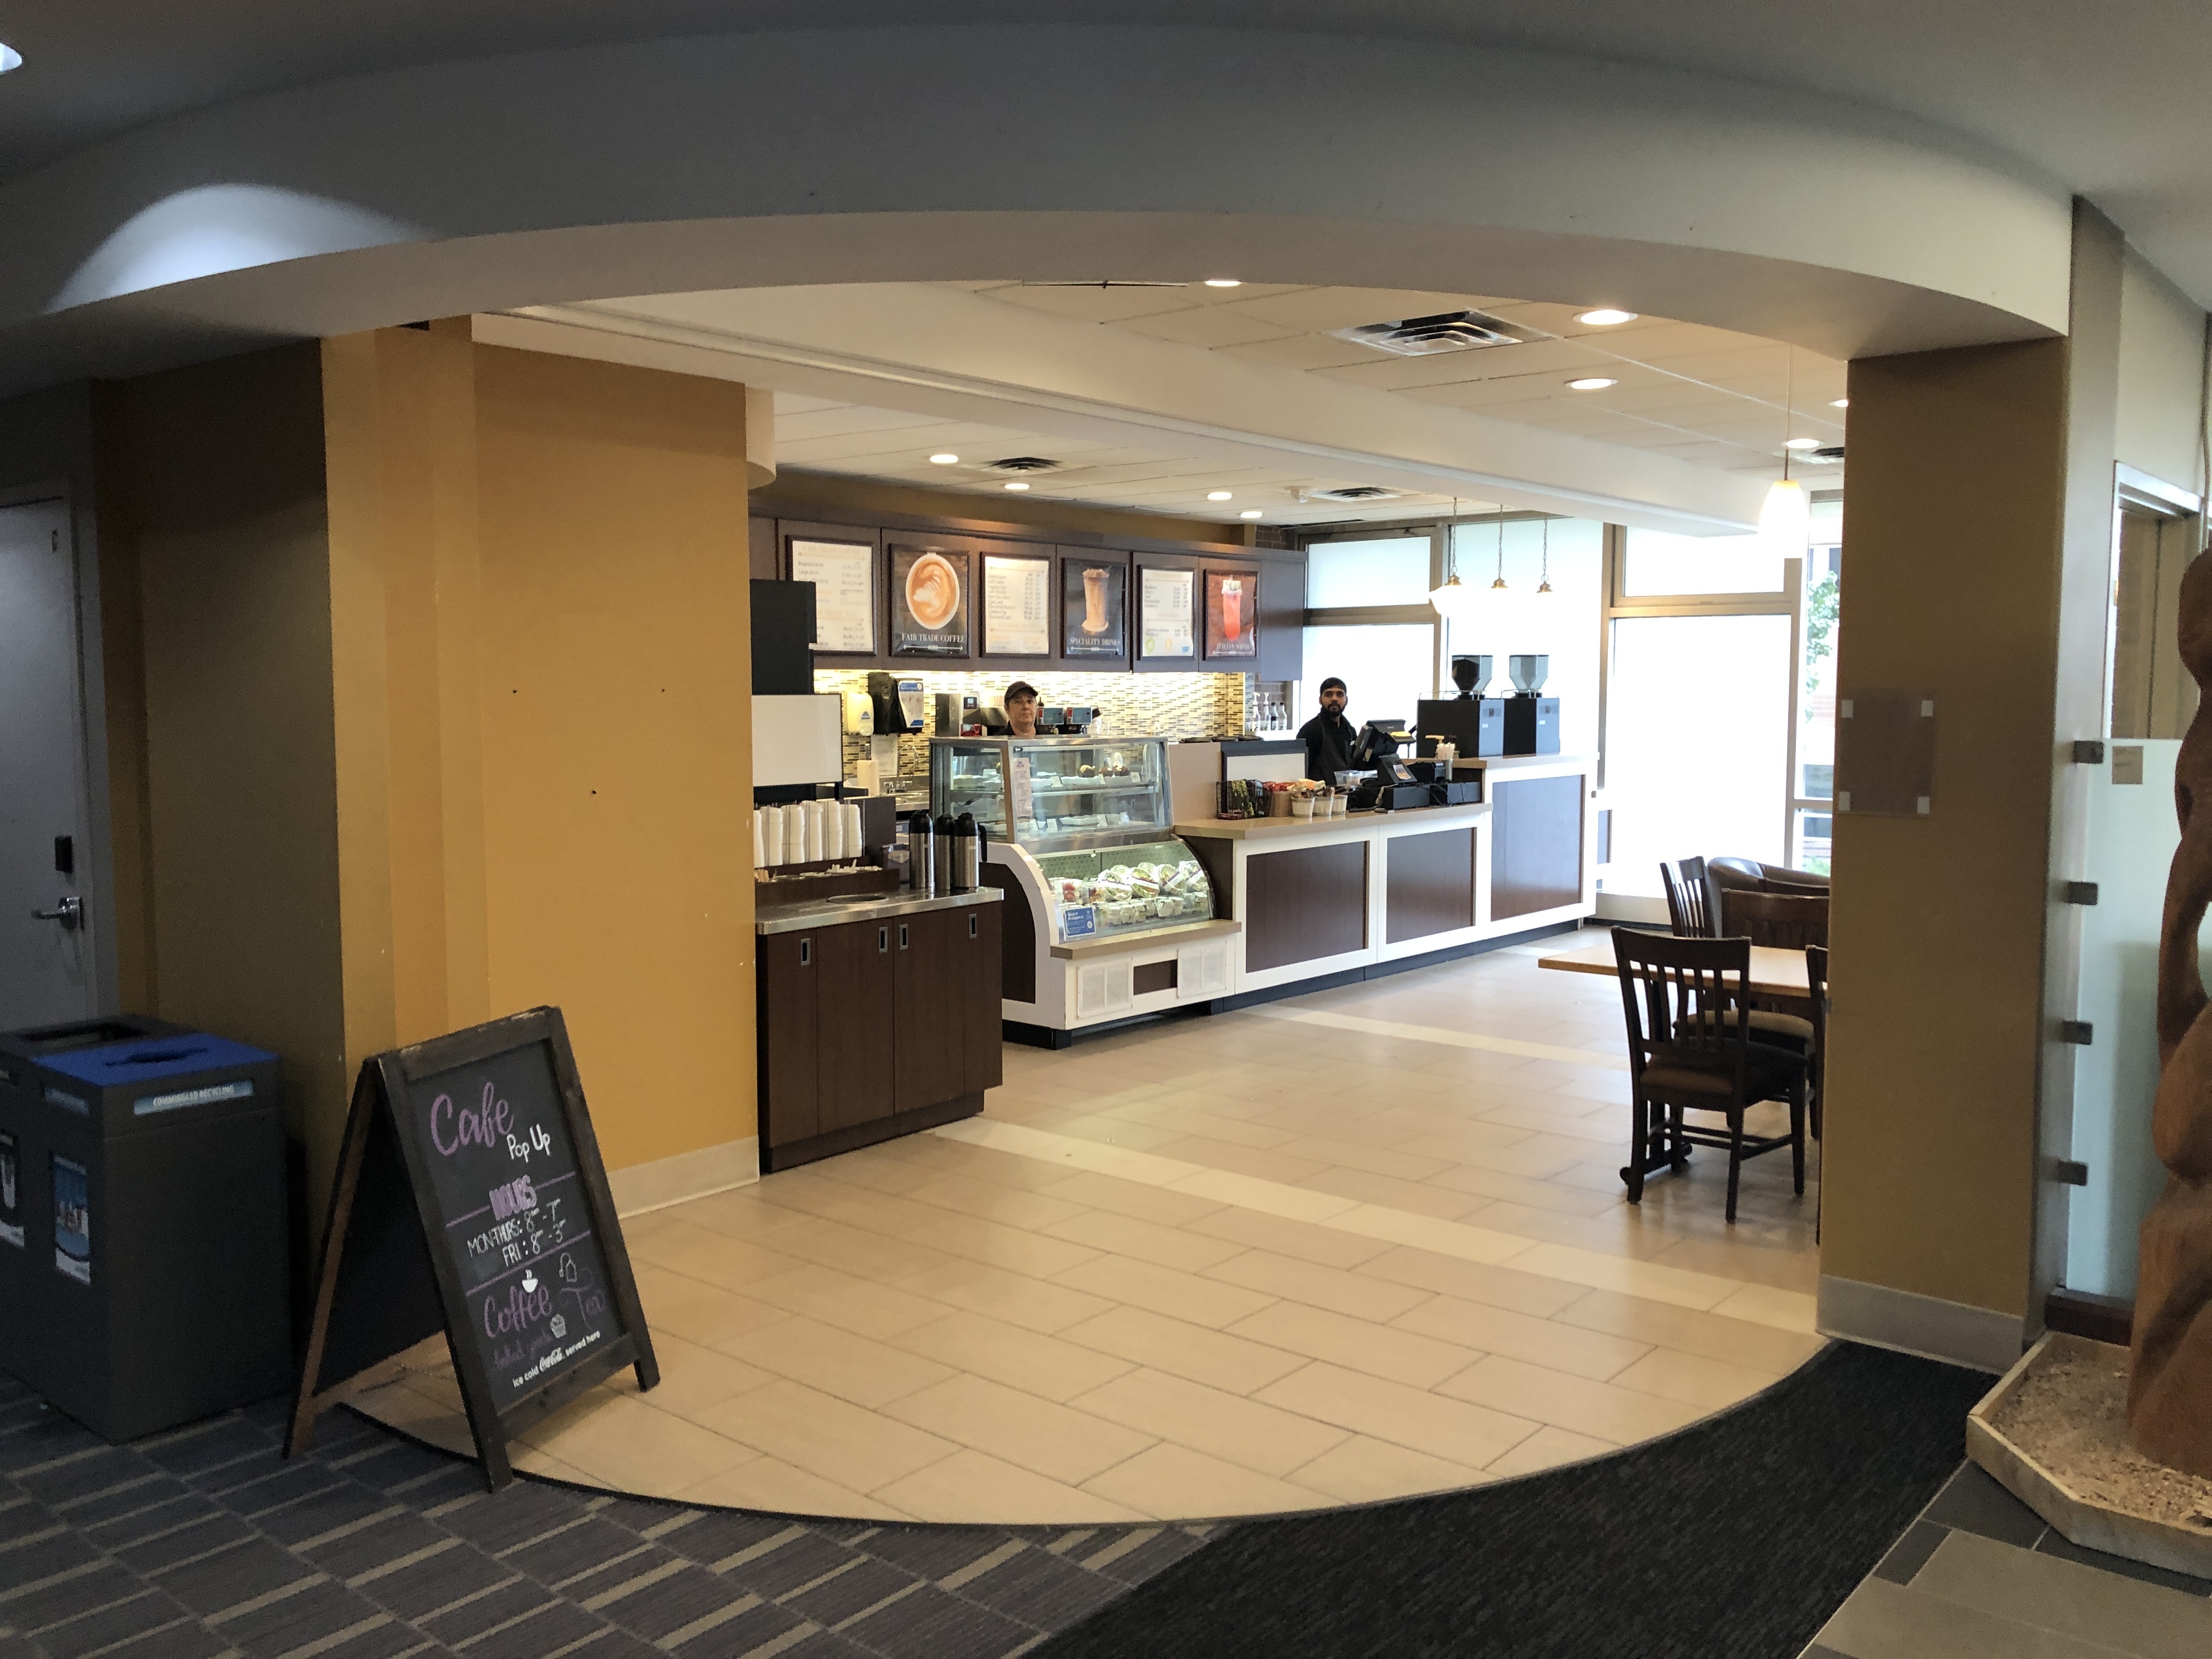 Coffee shop when it is open. There is a sandwich board with hours. The floor of the coffee shop is titled while the lobby is carpeted. There is a counter to order and usually two employees. There are chairs and a few tables